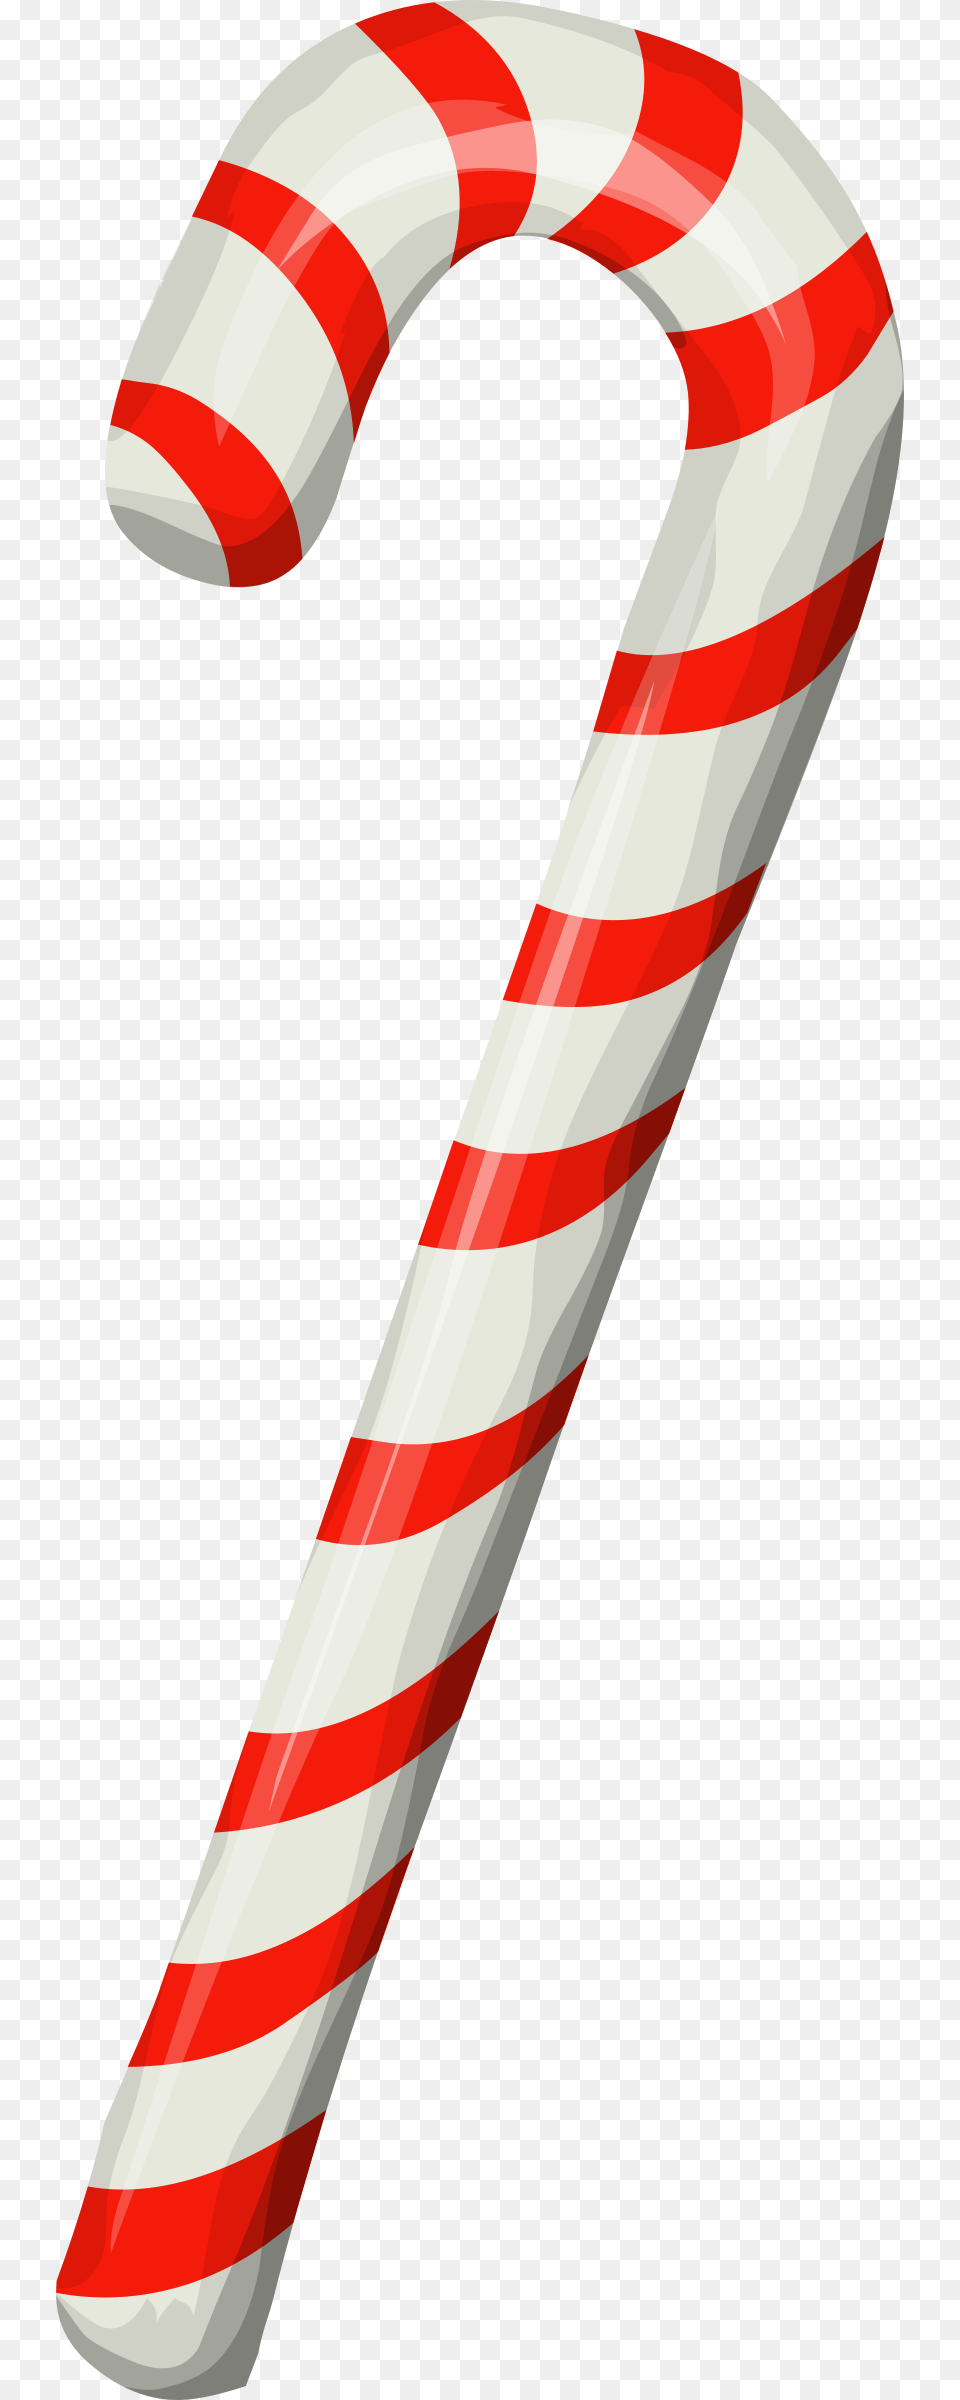 Flag Candy Cane, Food, Stick, Sweets, Mortar Shell Free Png